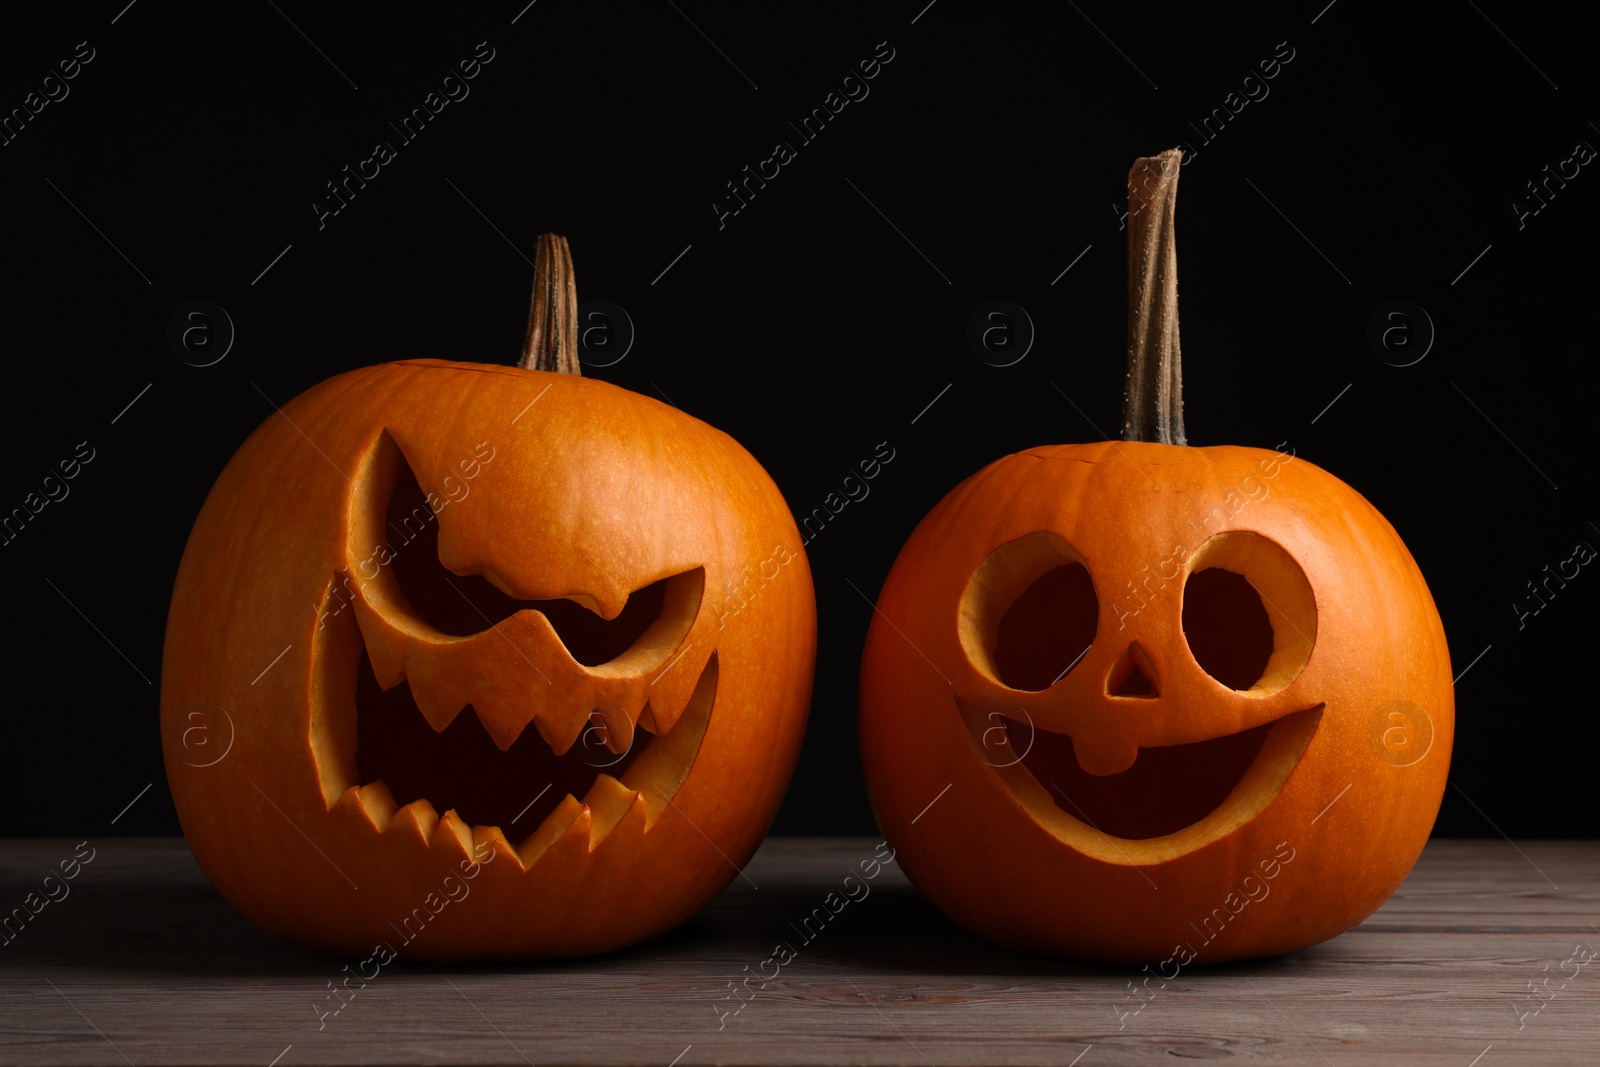 Photo of Scary jack o'lanterns made of pumpkins on wooden table against black background. Halloween traditional decor